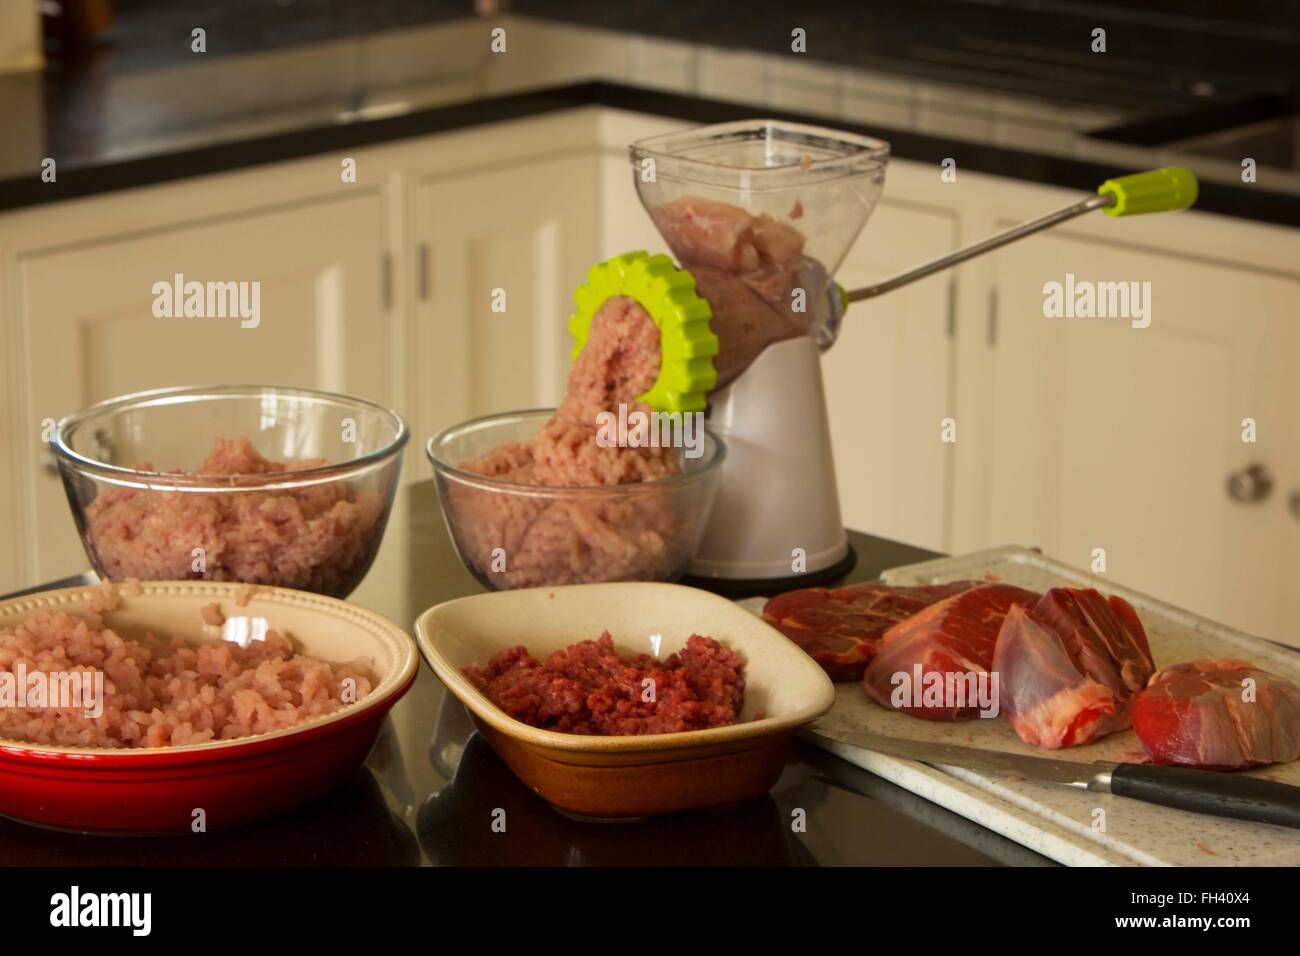 The home cook is preparing all sorts of minced meat to create meal sized batches that can be frozen and quickly heated up later. Stock Photo